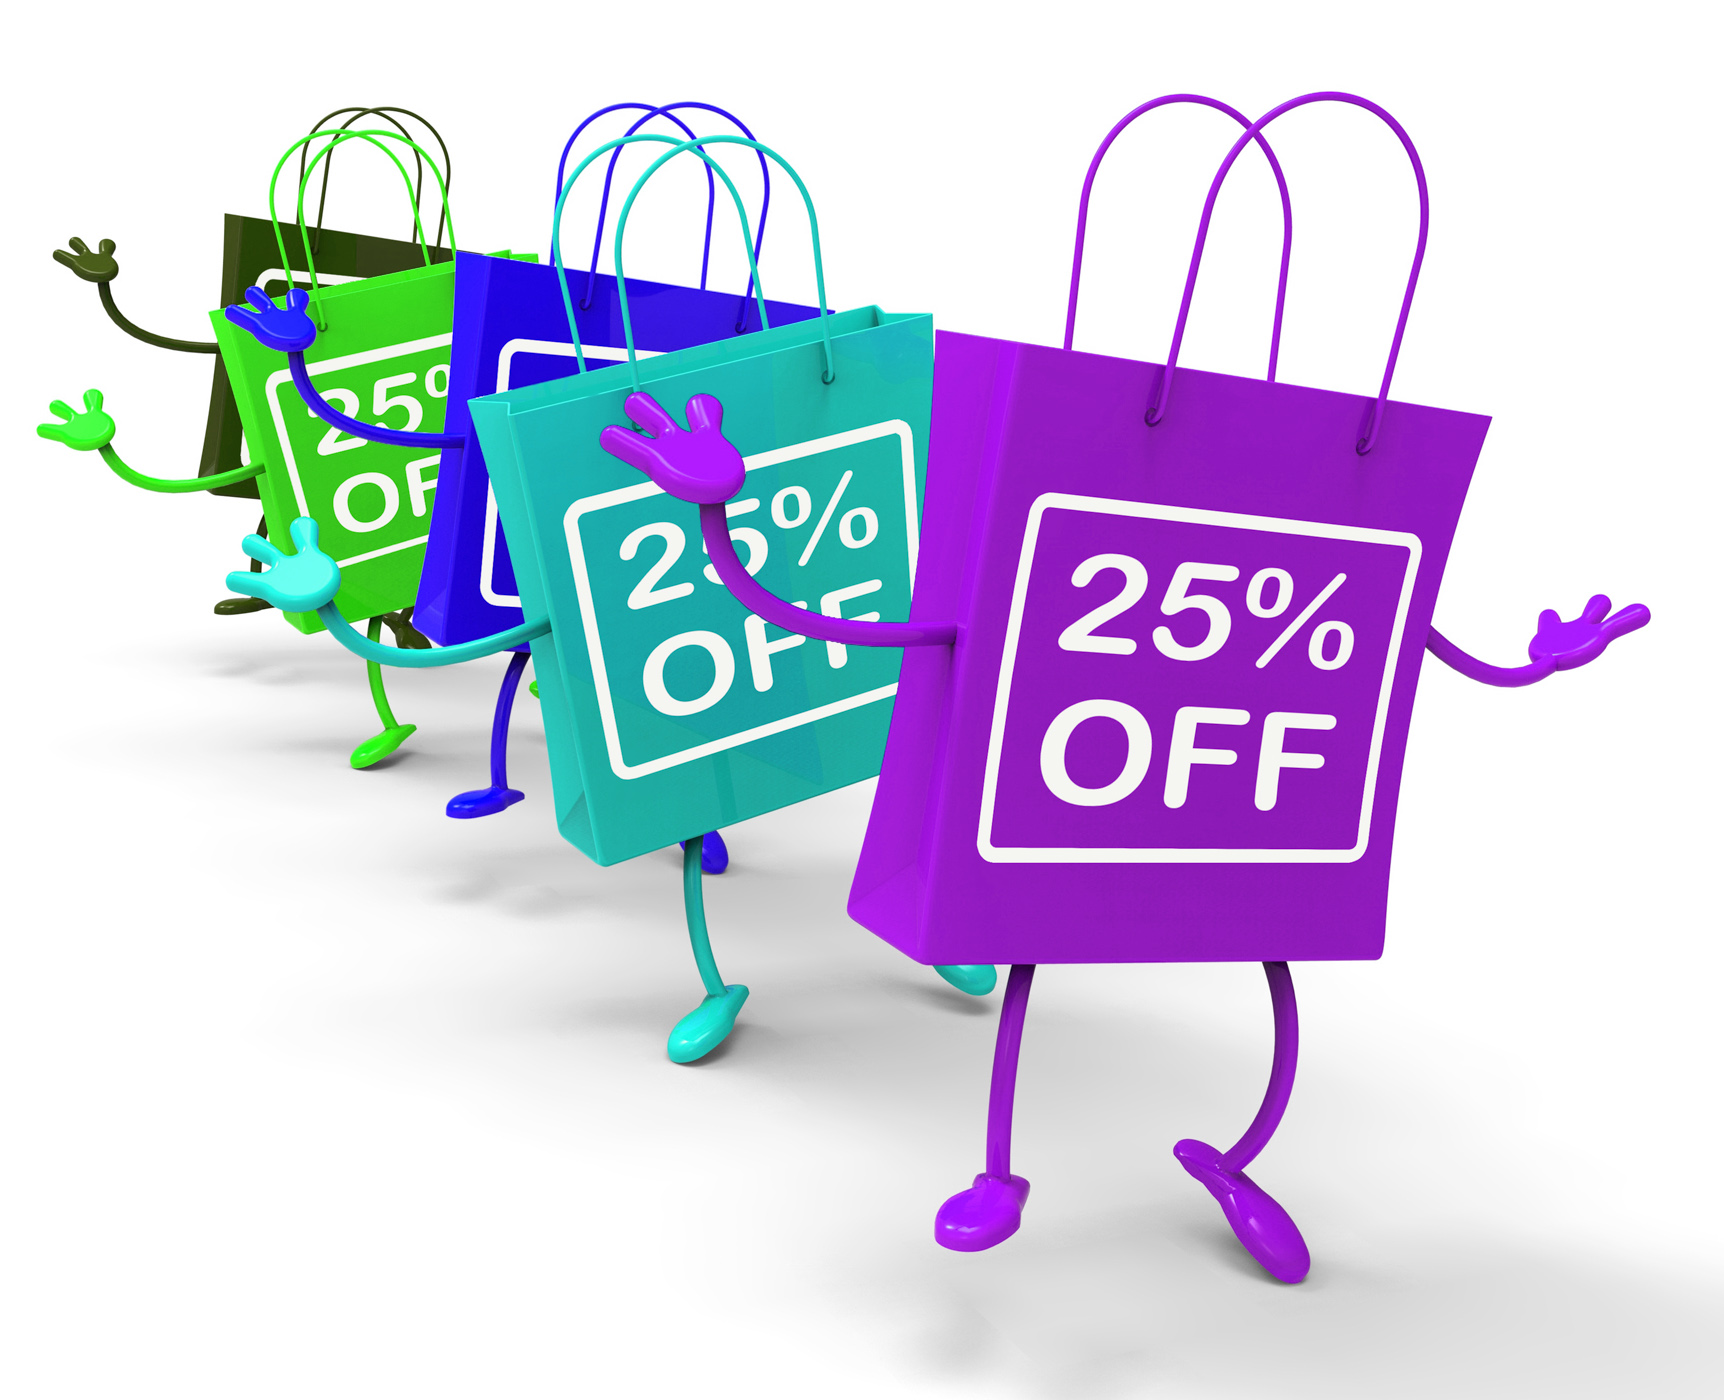 Twenty-five percent off on colored shopping bags show bargains photo